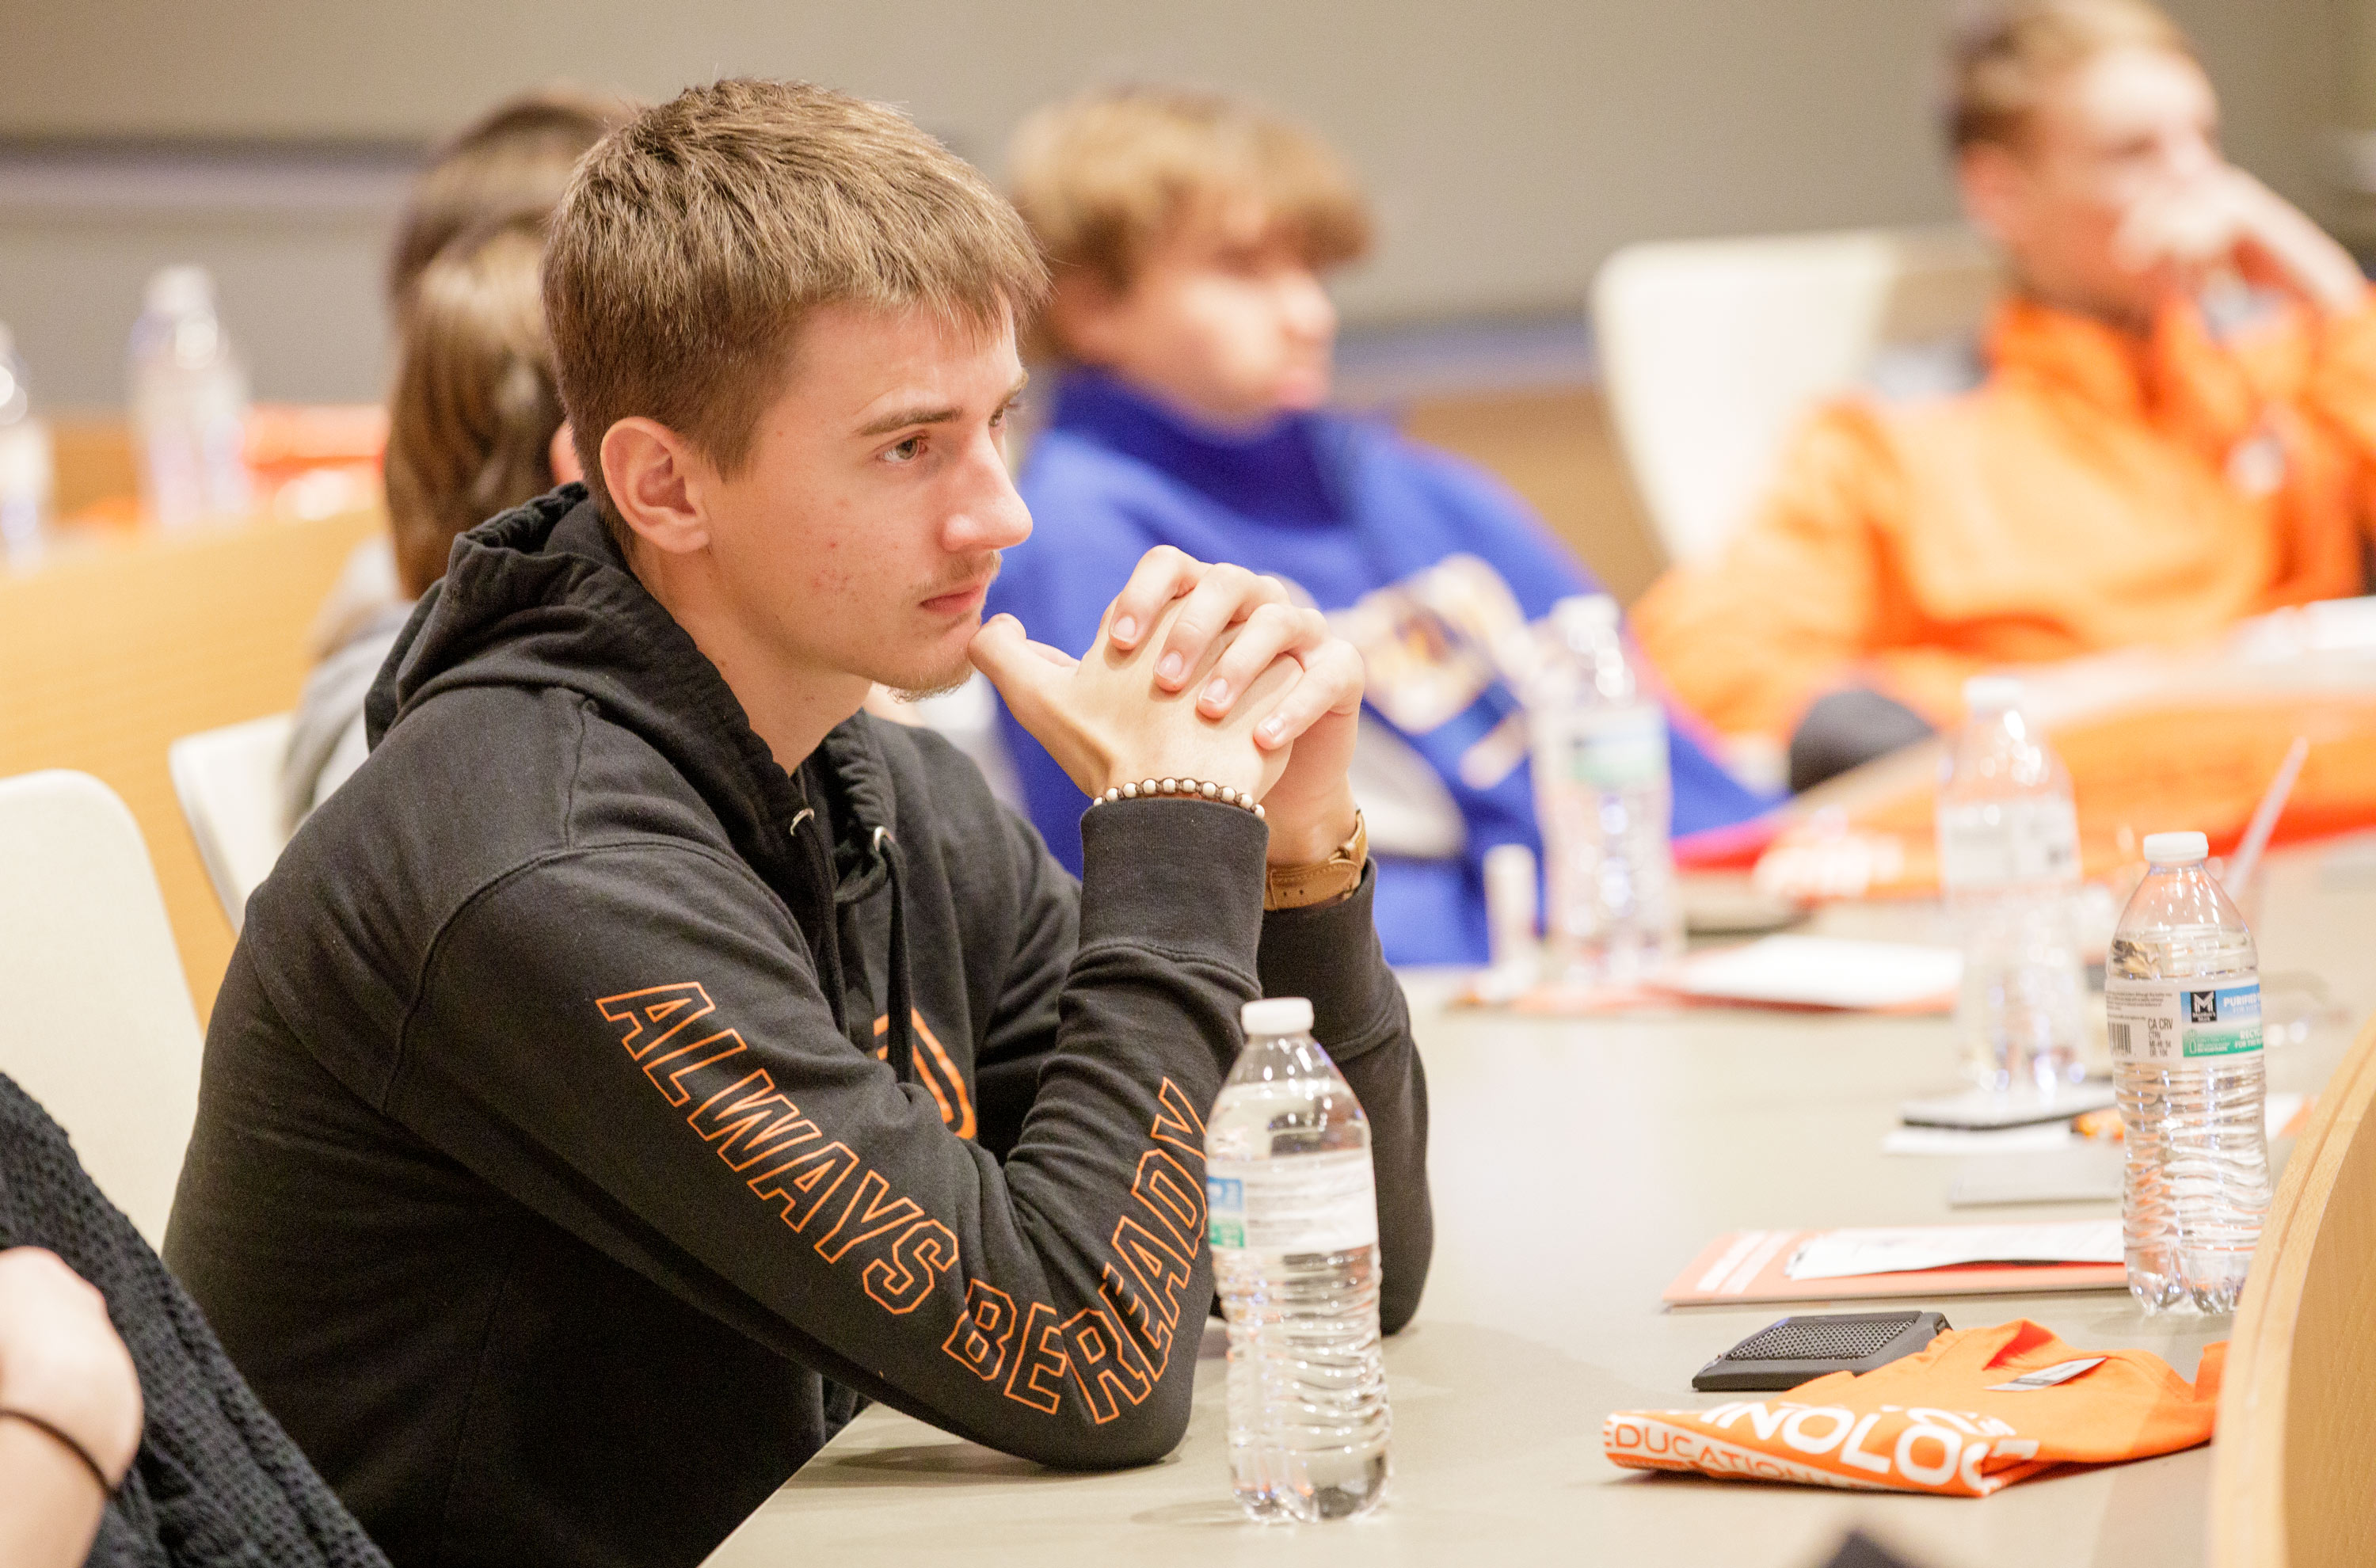 collaborates with OSU, offers employees tuition benefit in